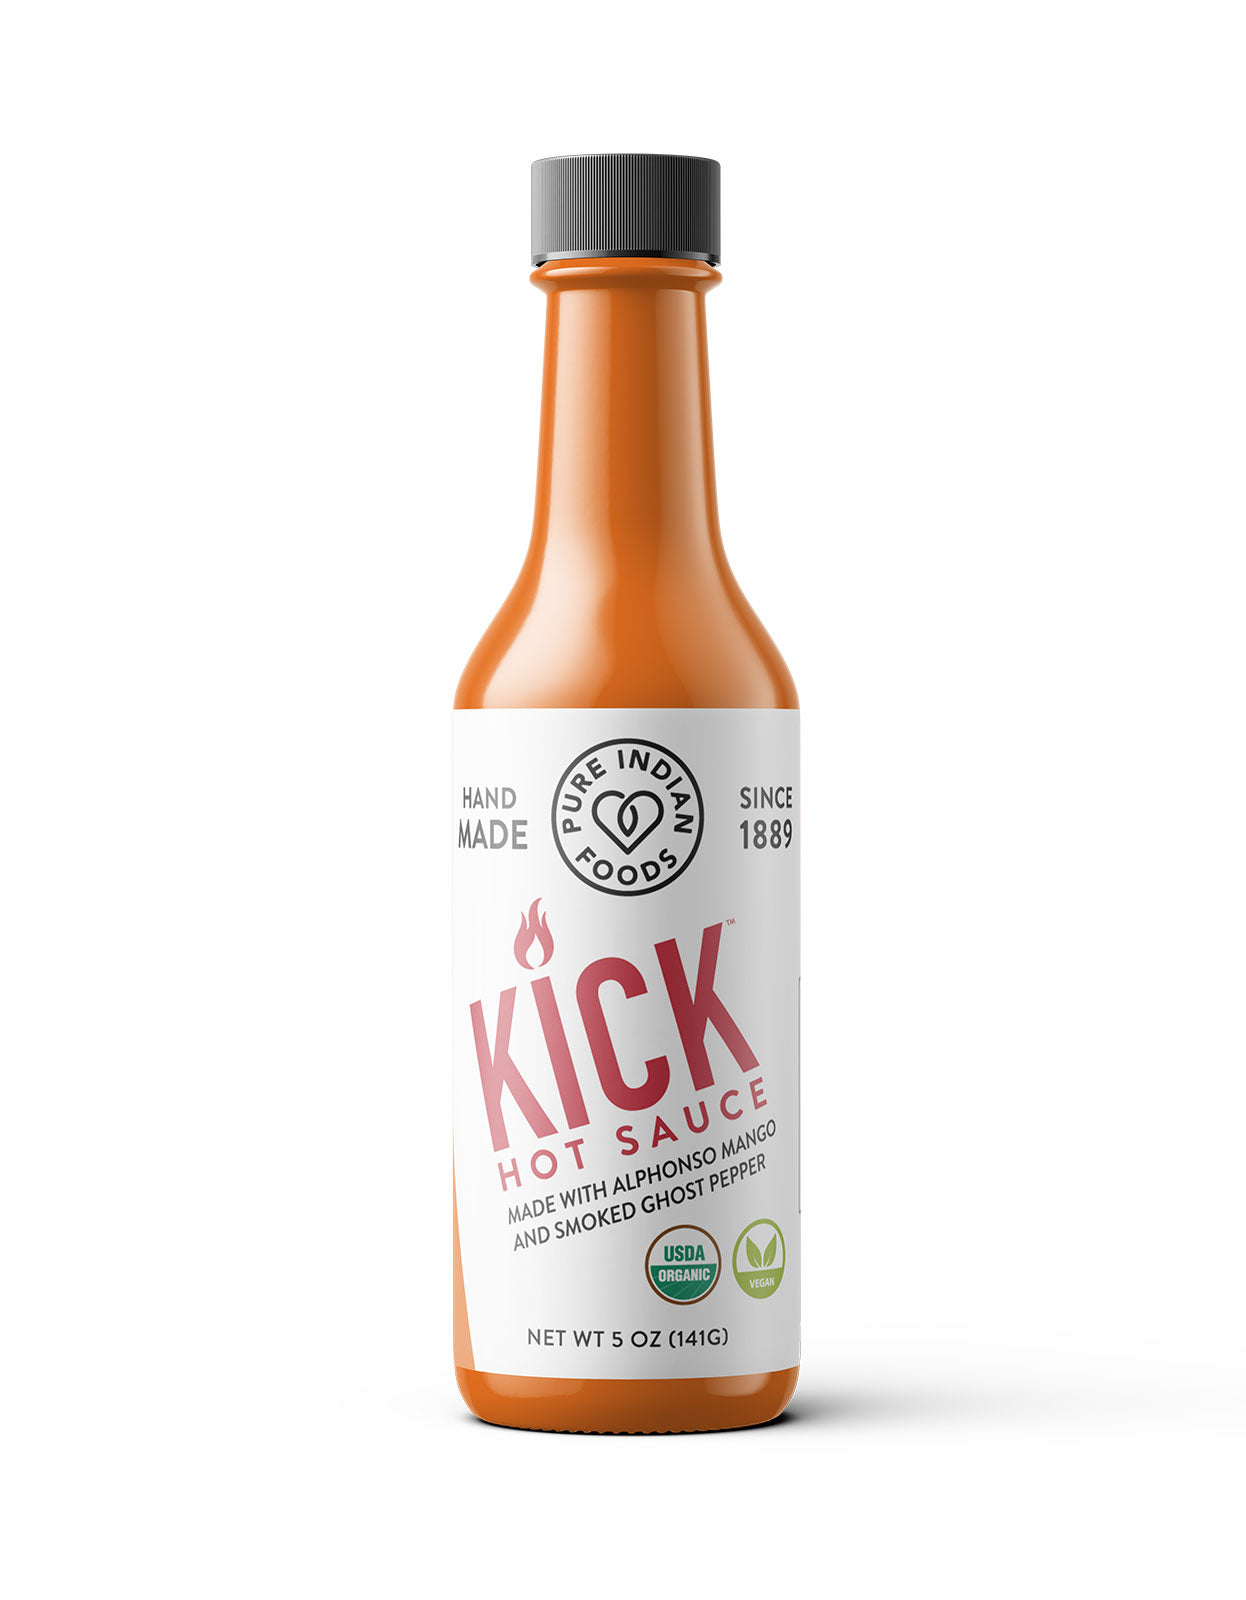 1 bottle of Pure Indian Foods KICK Hot Sauce. A certified organic, Mango Ghost Pepper Hot Sauce made with Alphonso mango and smoked Ghost pepper